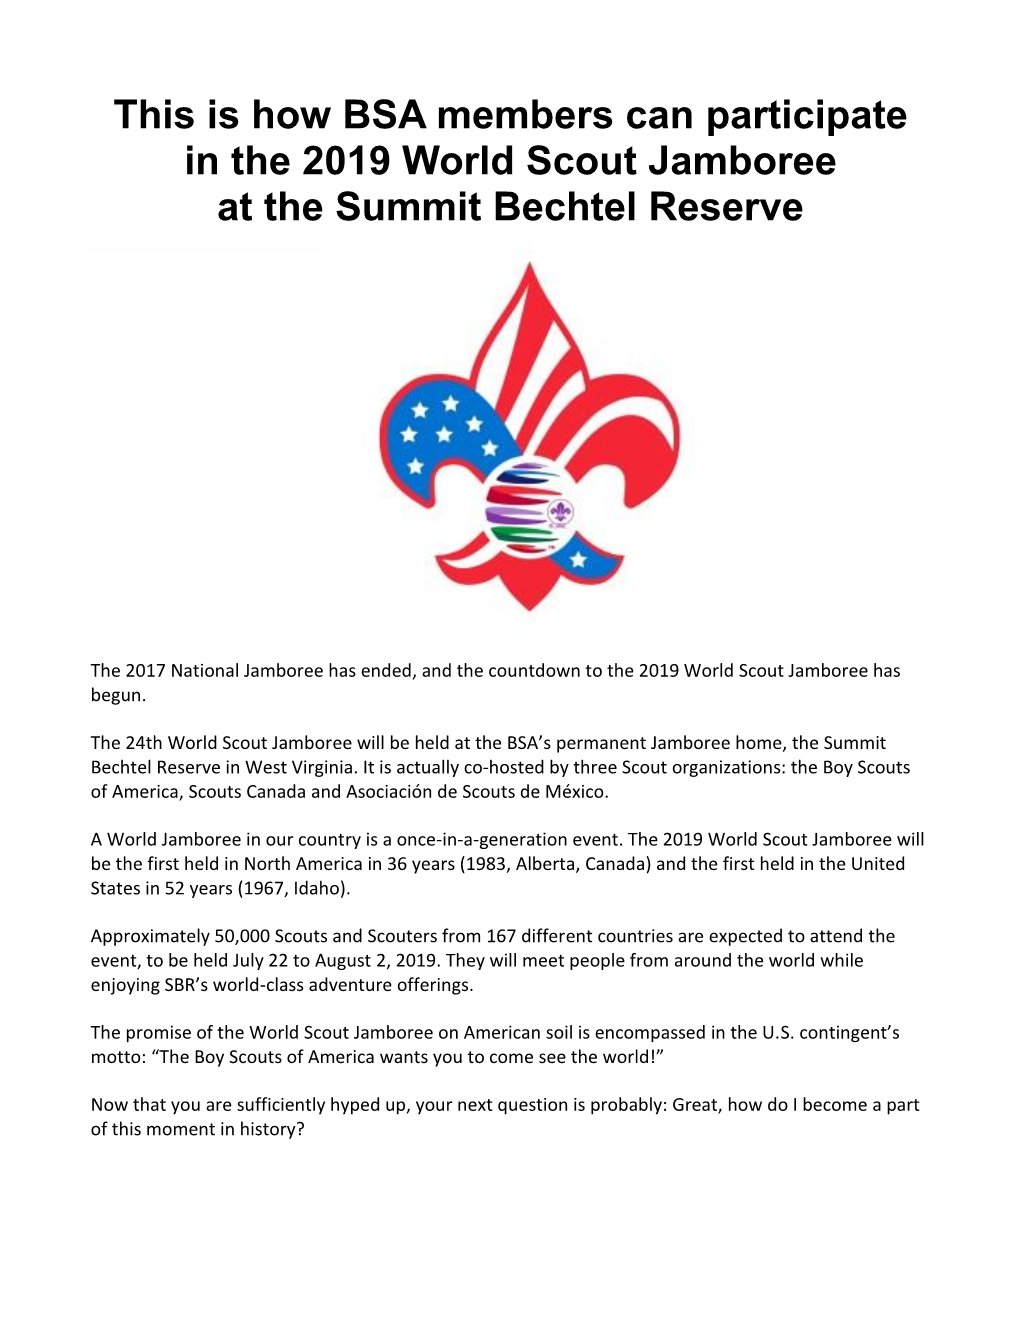 This Is How BSA Members Can Participate in the 2019 World Scout Jamboree at the Summit Bechtel Reserve